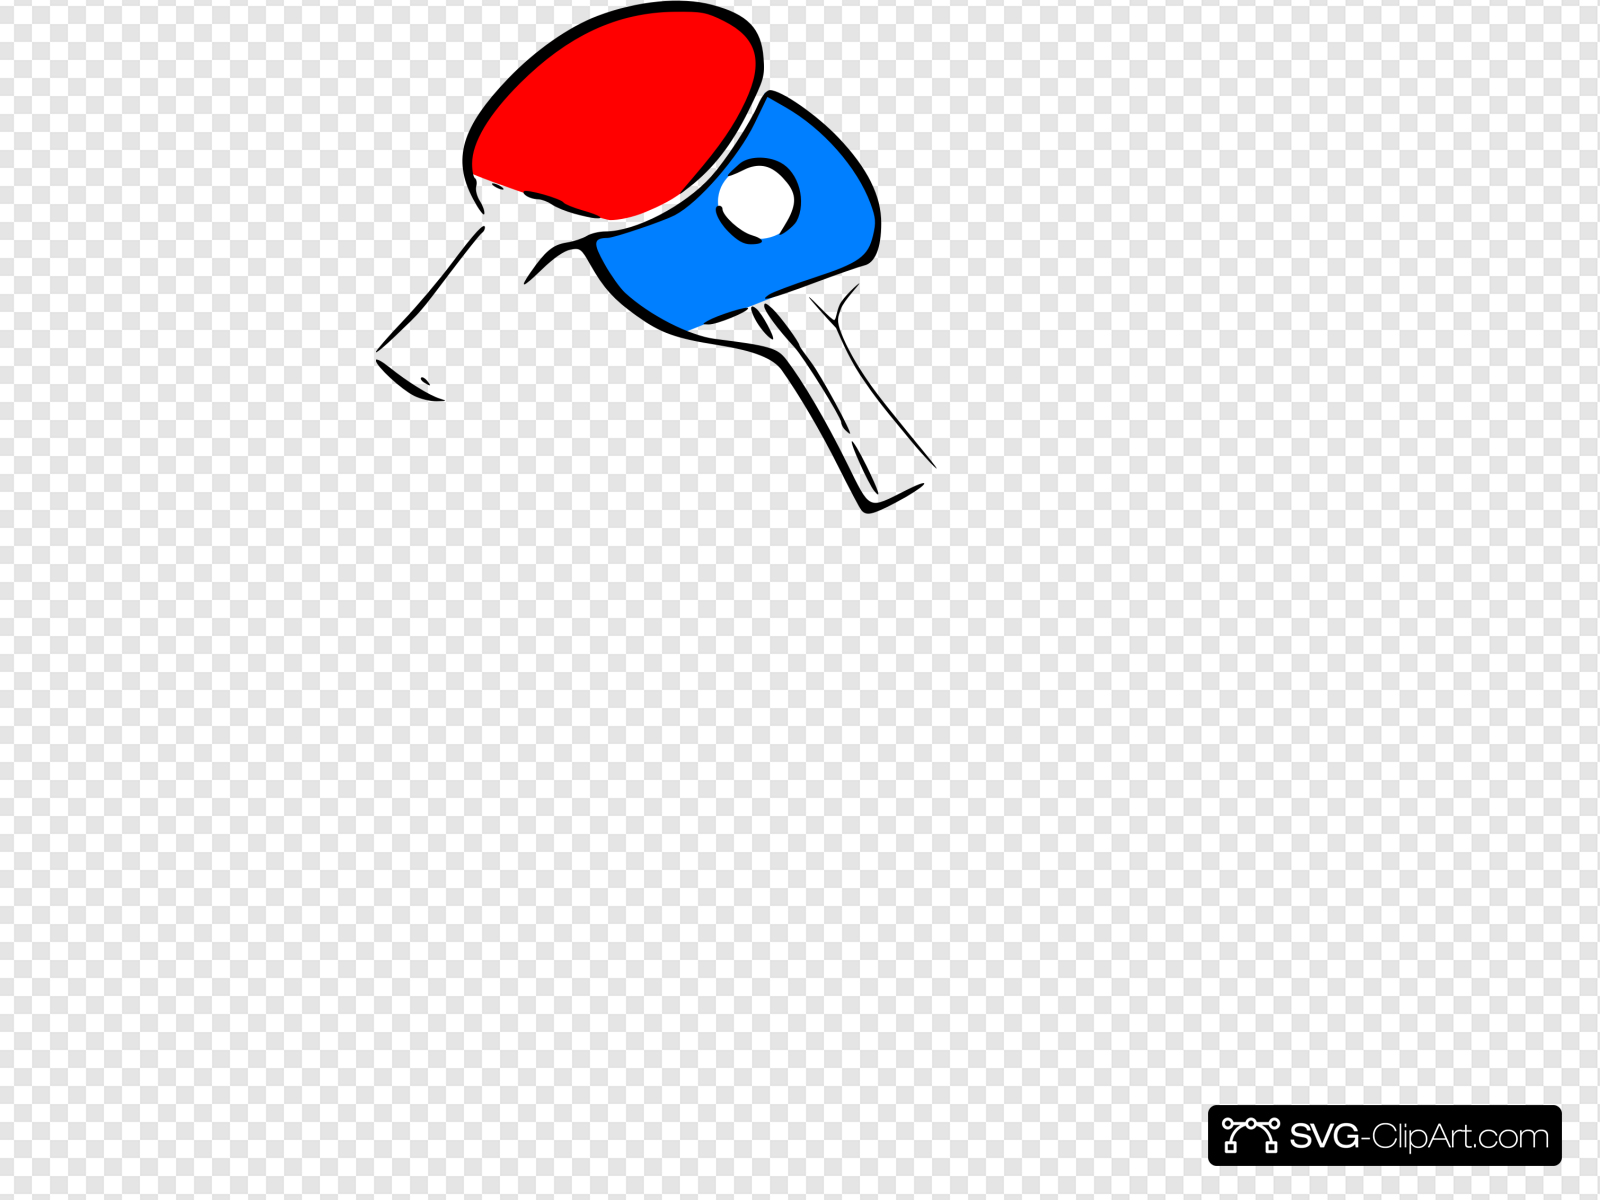 Table Tennis Clip art, Icon and SVG